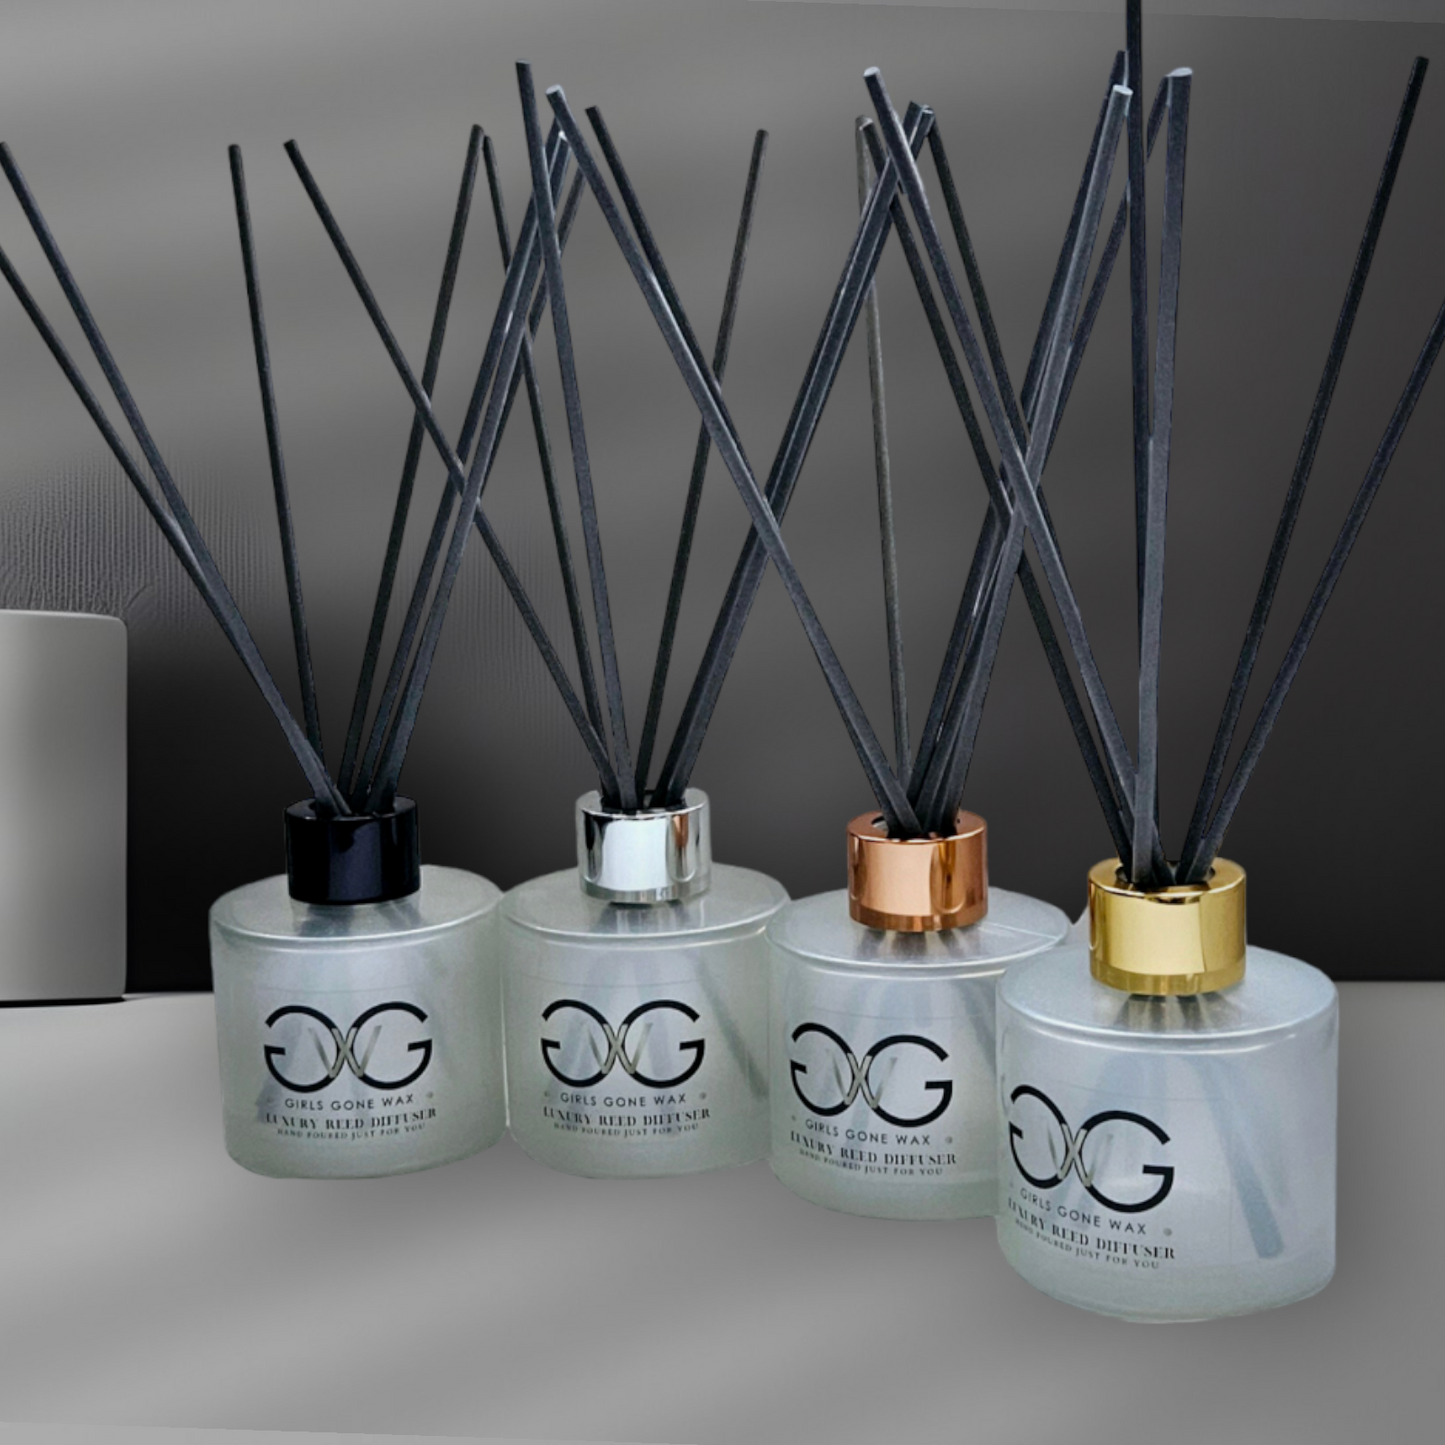 Pearlescent Reed Diffuser + Black Reeds (100ml)